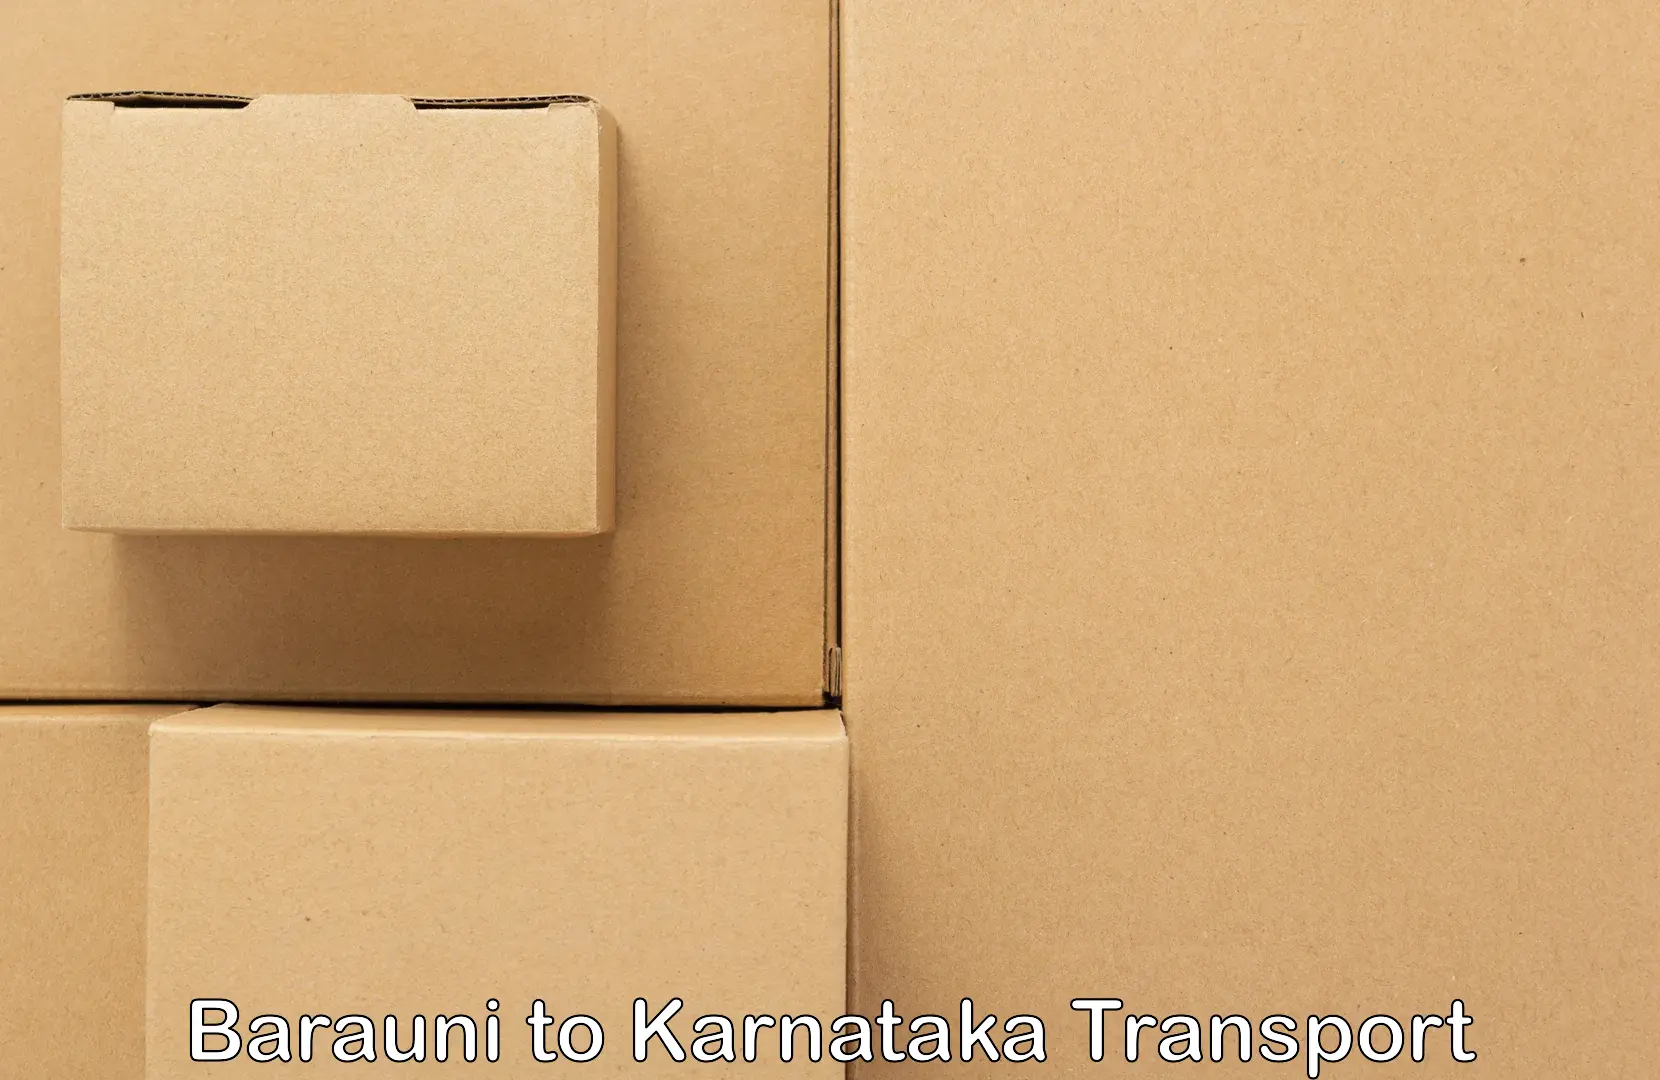 Truck transport companies in India Barauni to Davangere